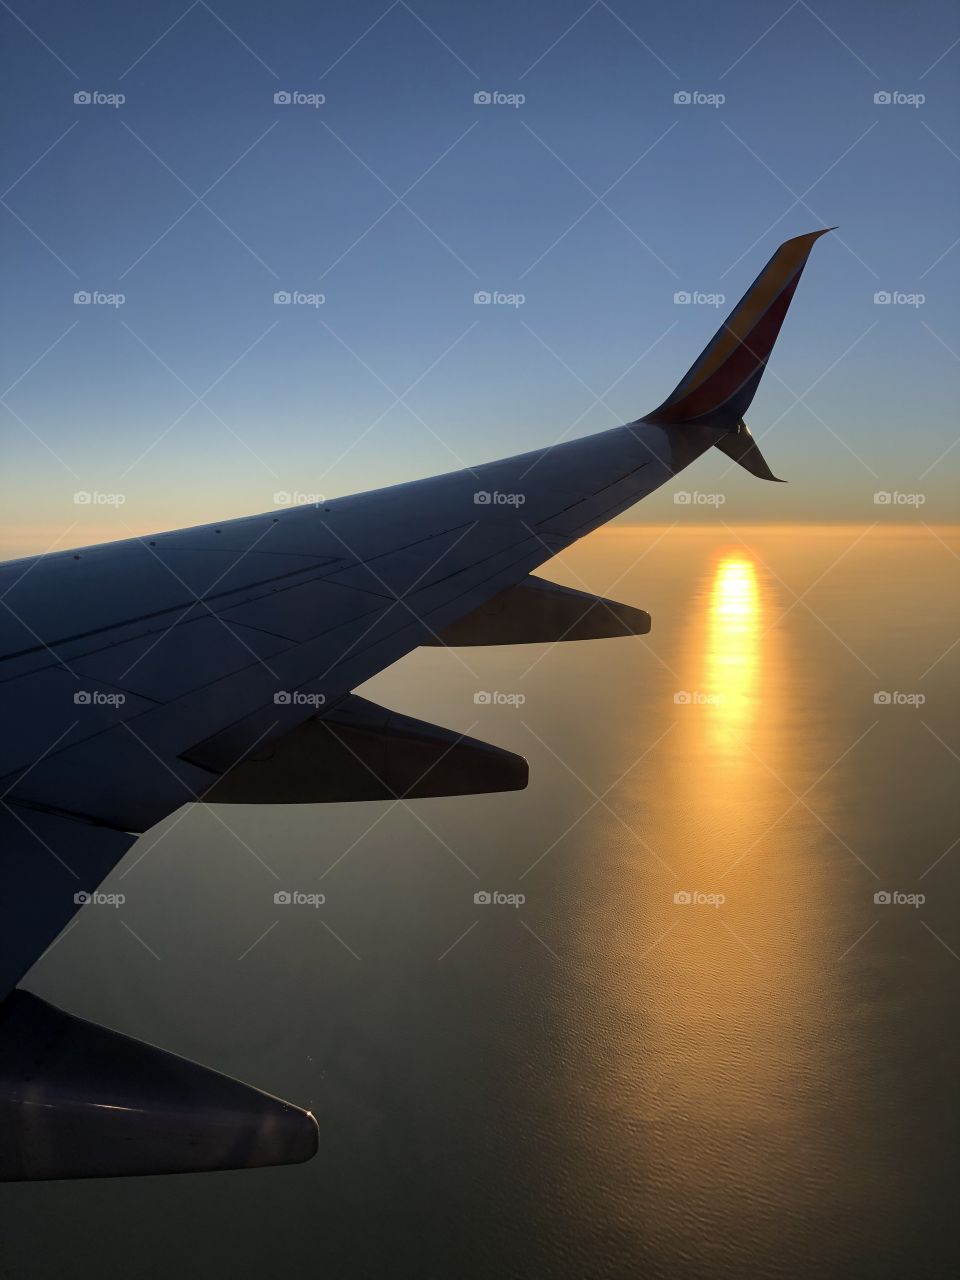 Sunless Sunset on a plane over Gulf of Mexico with view of airplane right wing